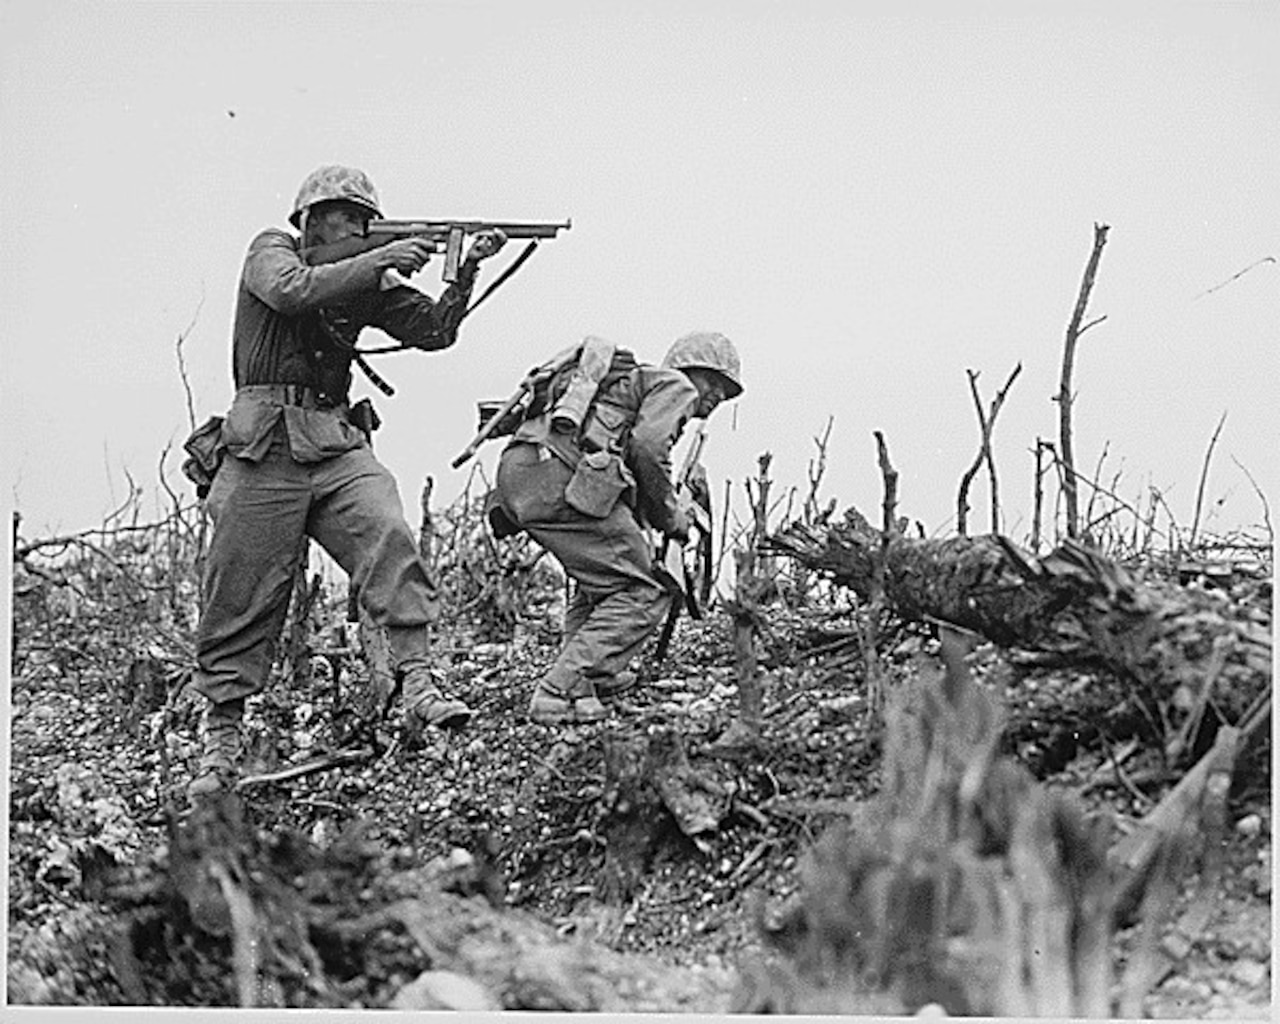 One man points his rifle as another man ducks down in brush.